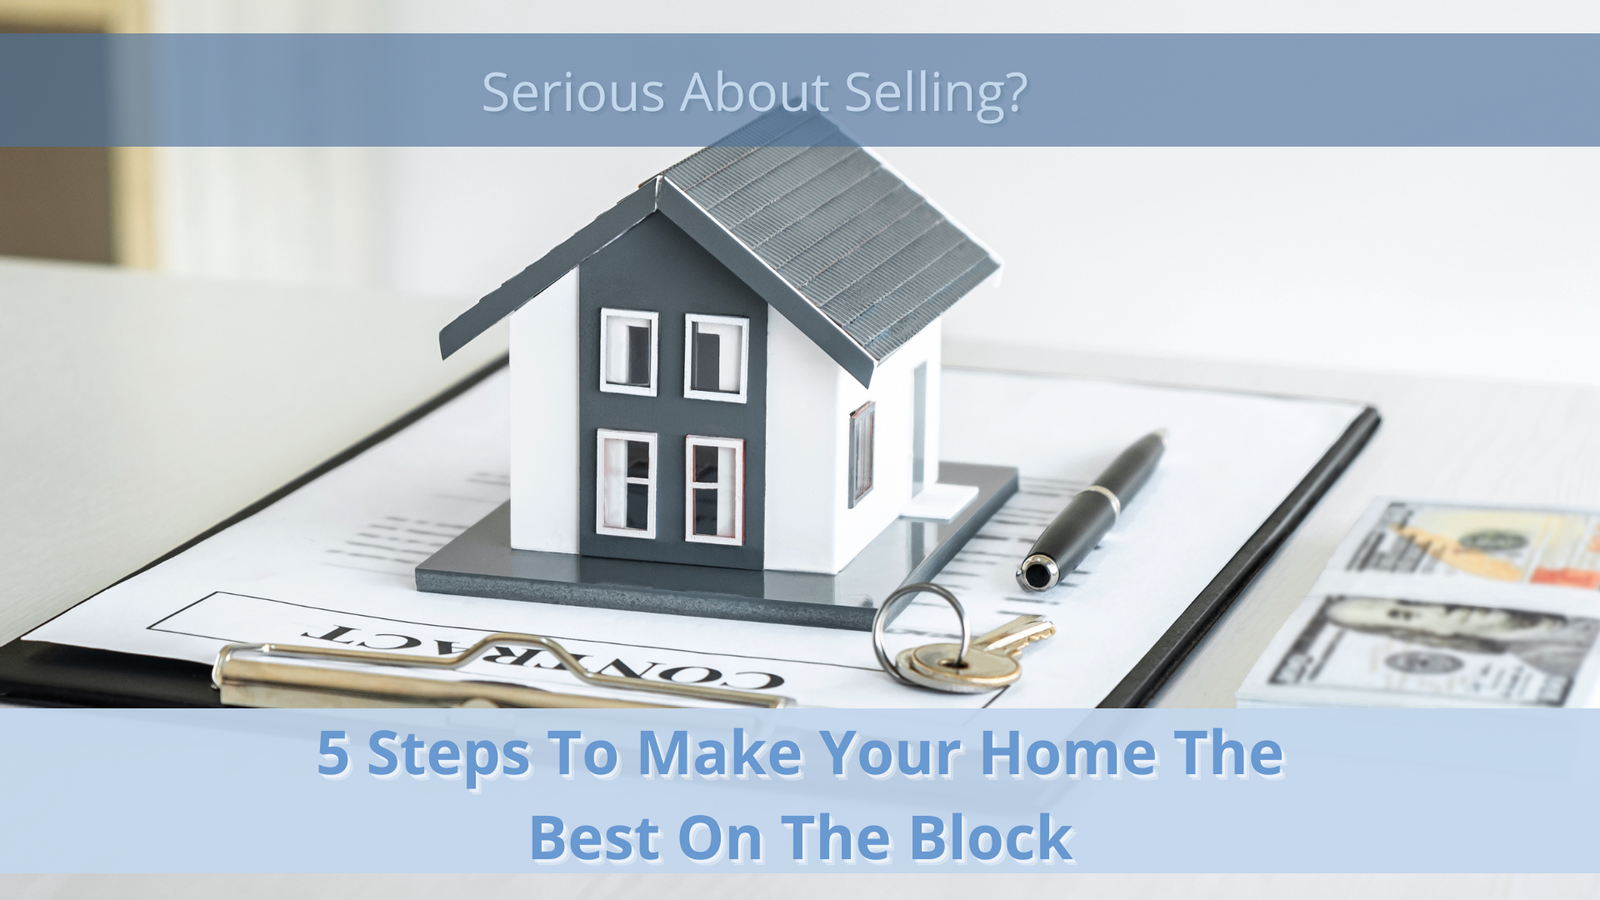 5 Steps to Make Your Home the Best on the Block